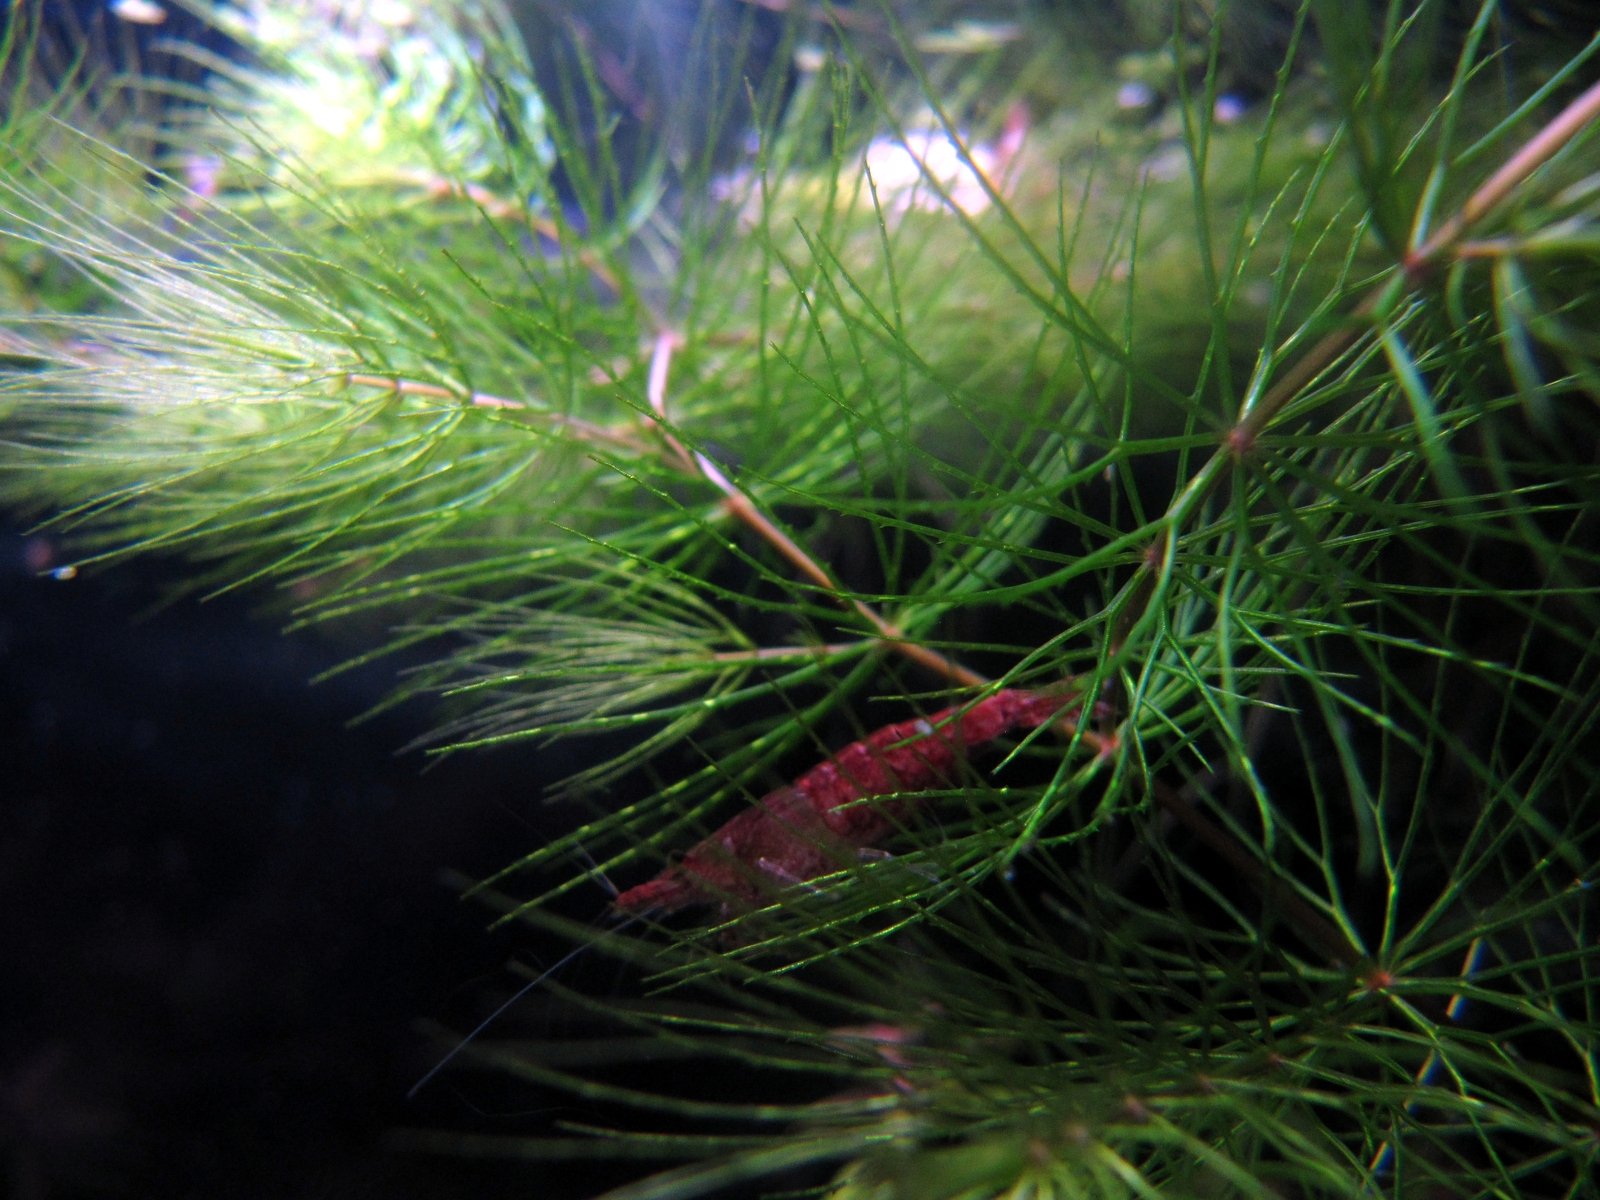 a close up of a pine nch with small red creature